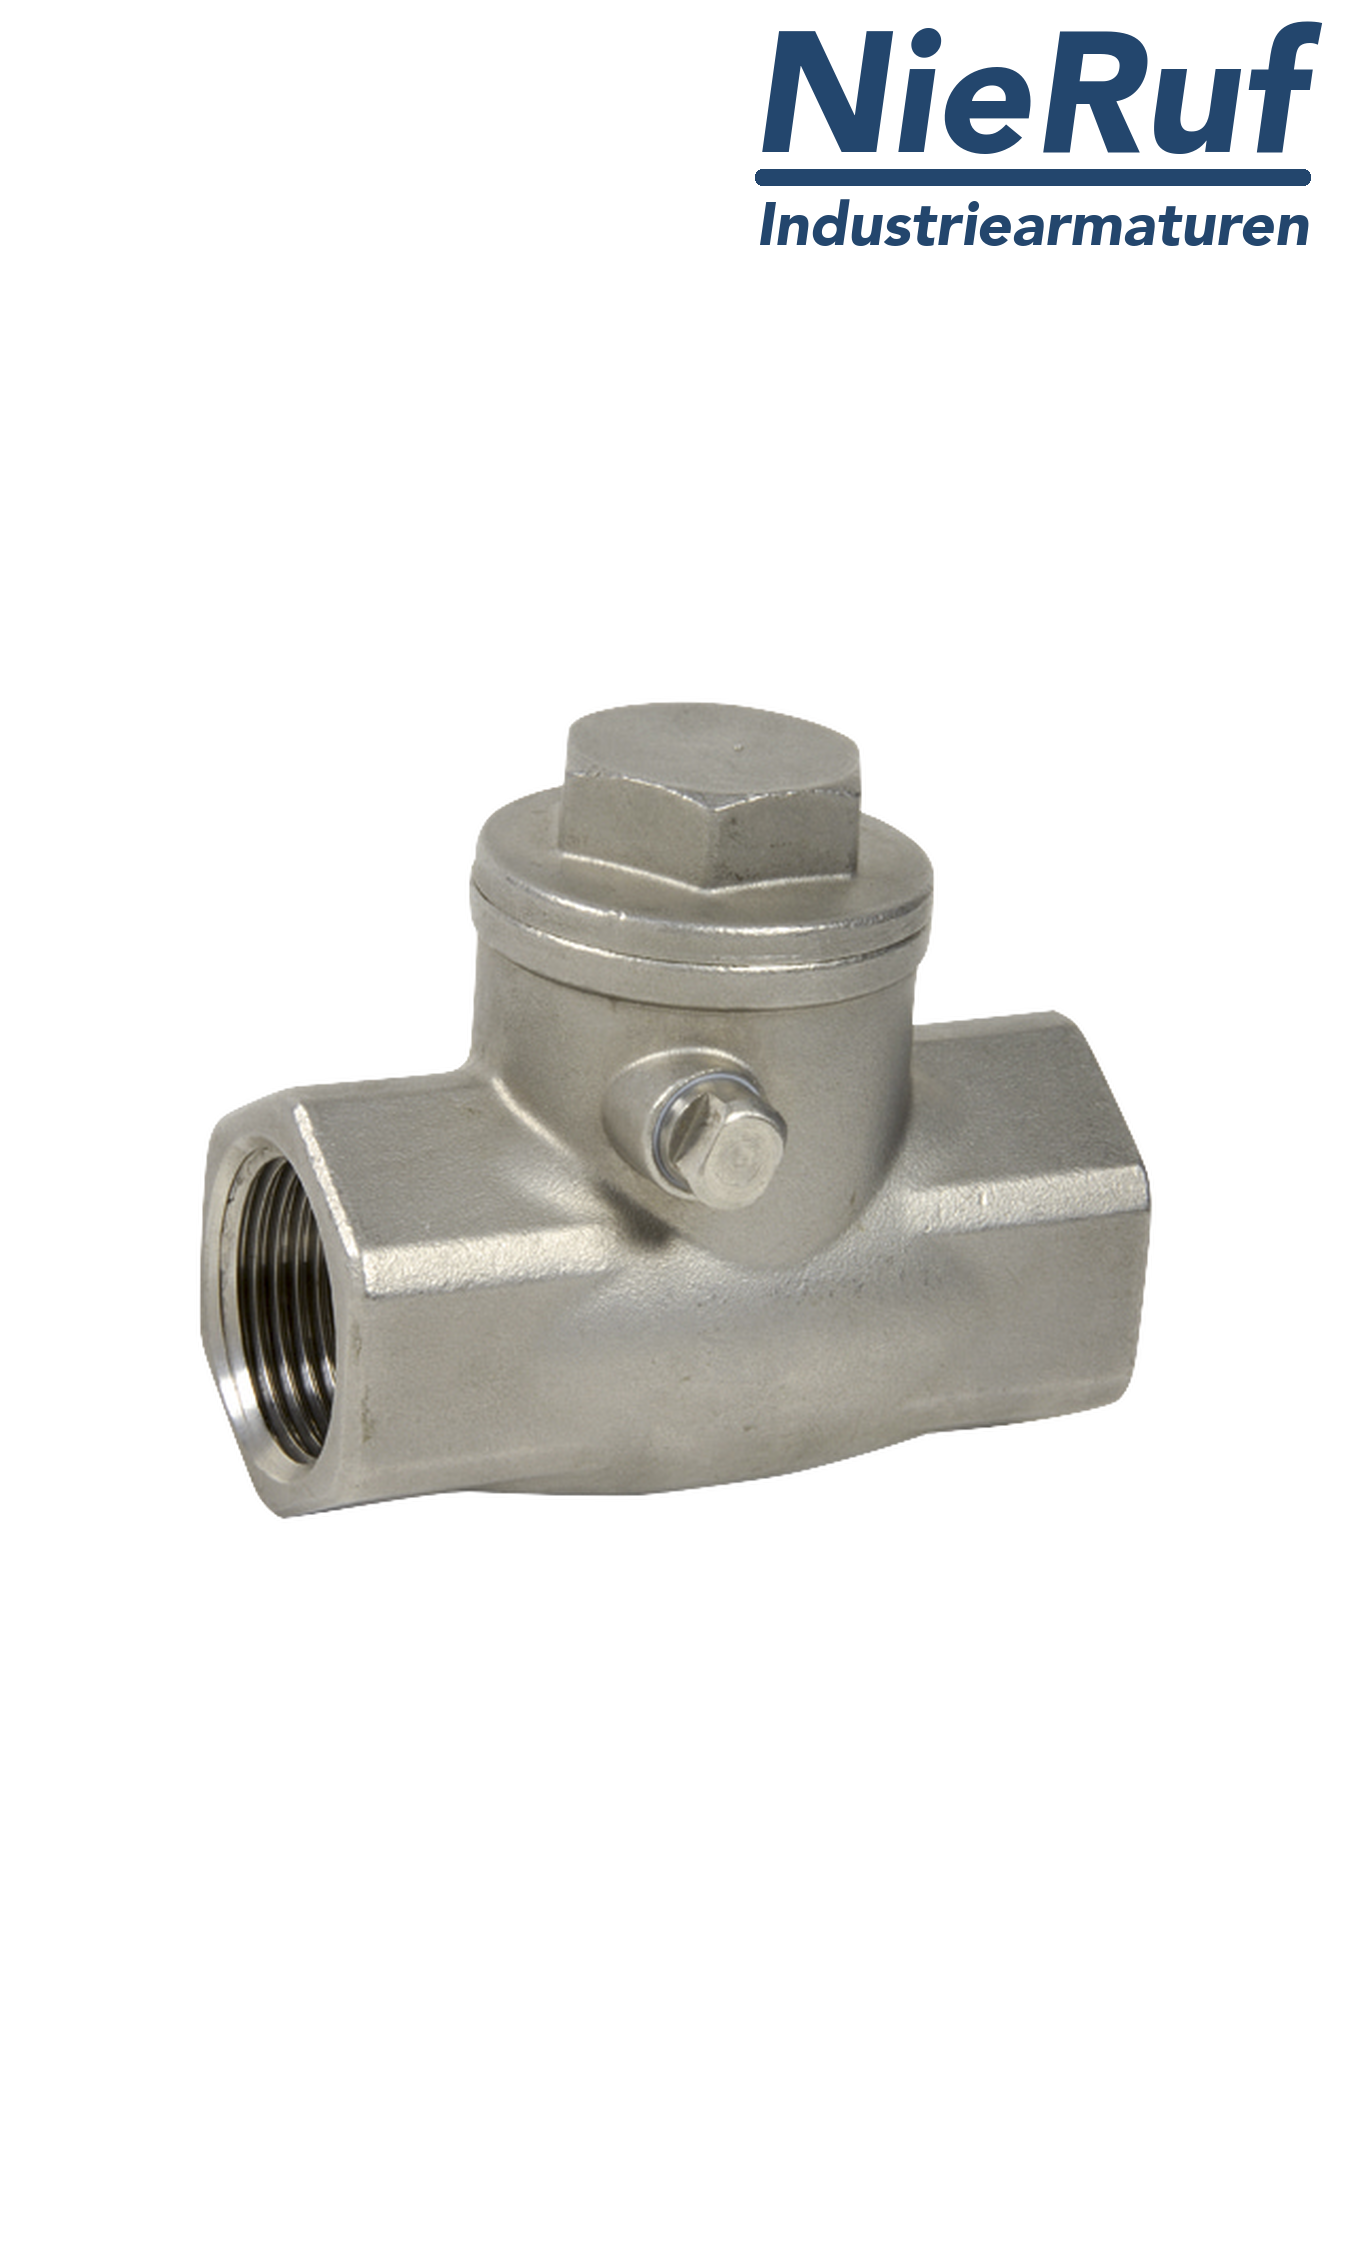 swing check valve 1" inch GR01 stainless metall